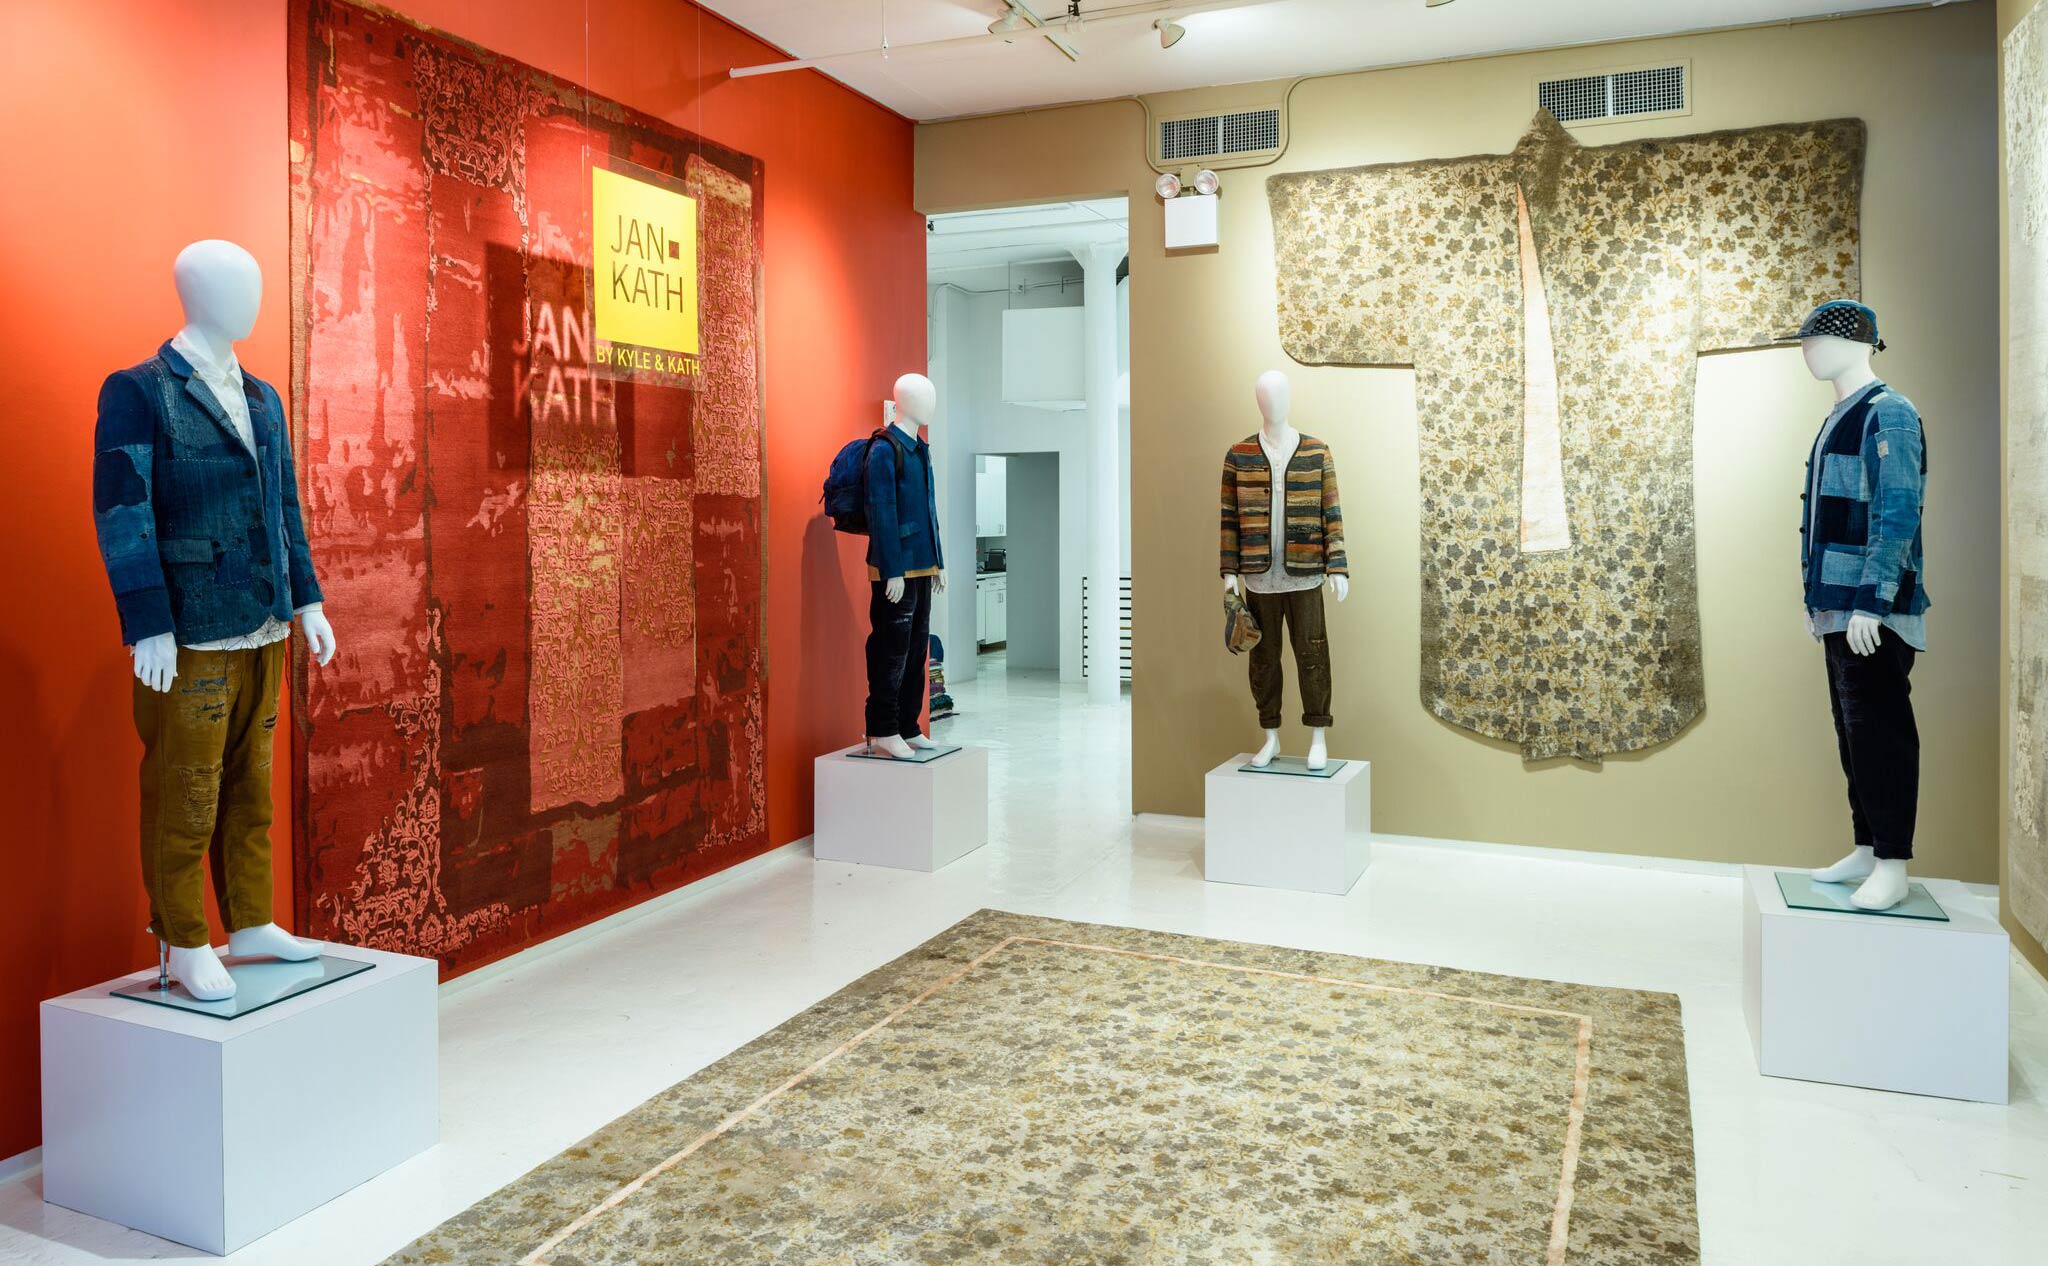 Mannequins dressed in contemporary bespoke Boro clothing from 'Kuon' ask 'What kind of exhibit are we in?' as they stand proud against an assortment of bold Jan Kath carpets including the whimsically shaped 'Dress Carpet' on the far wall. | Image courtesy of Jan Kath.